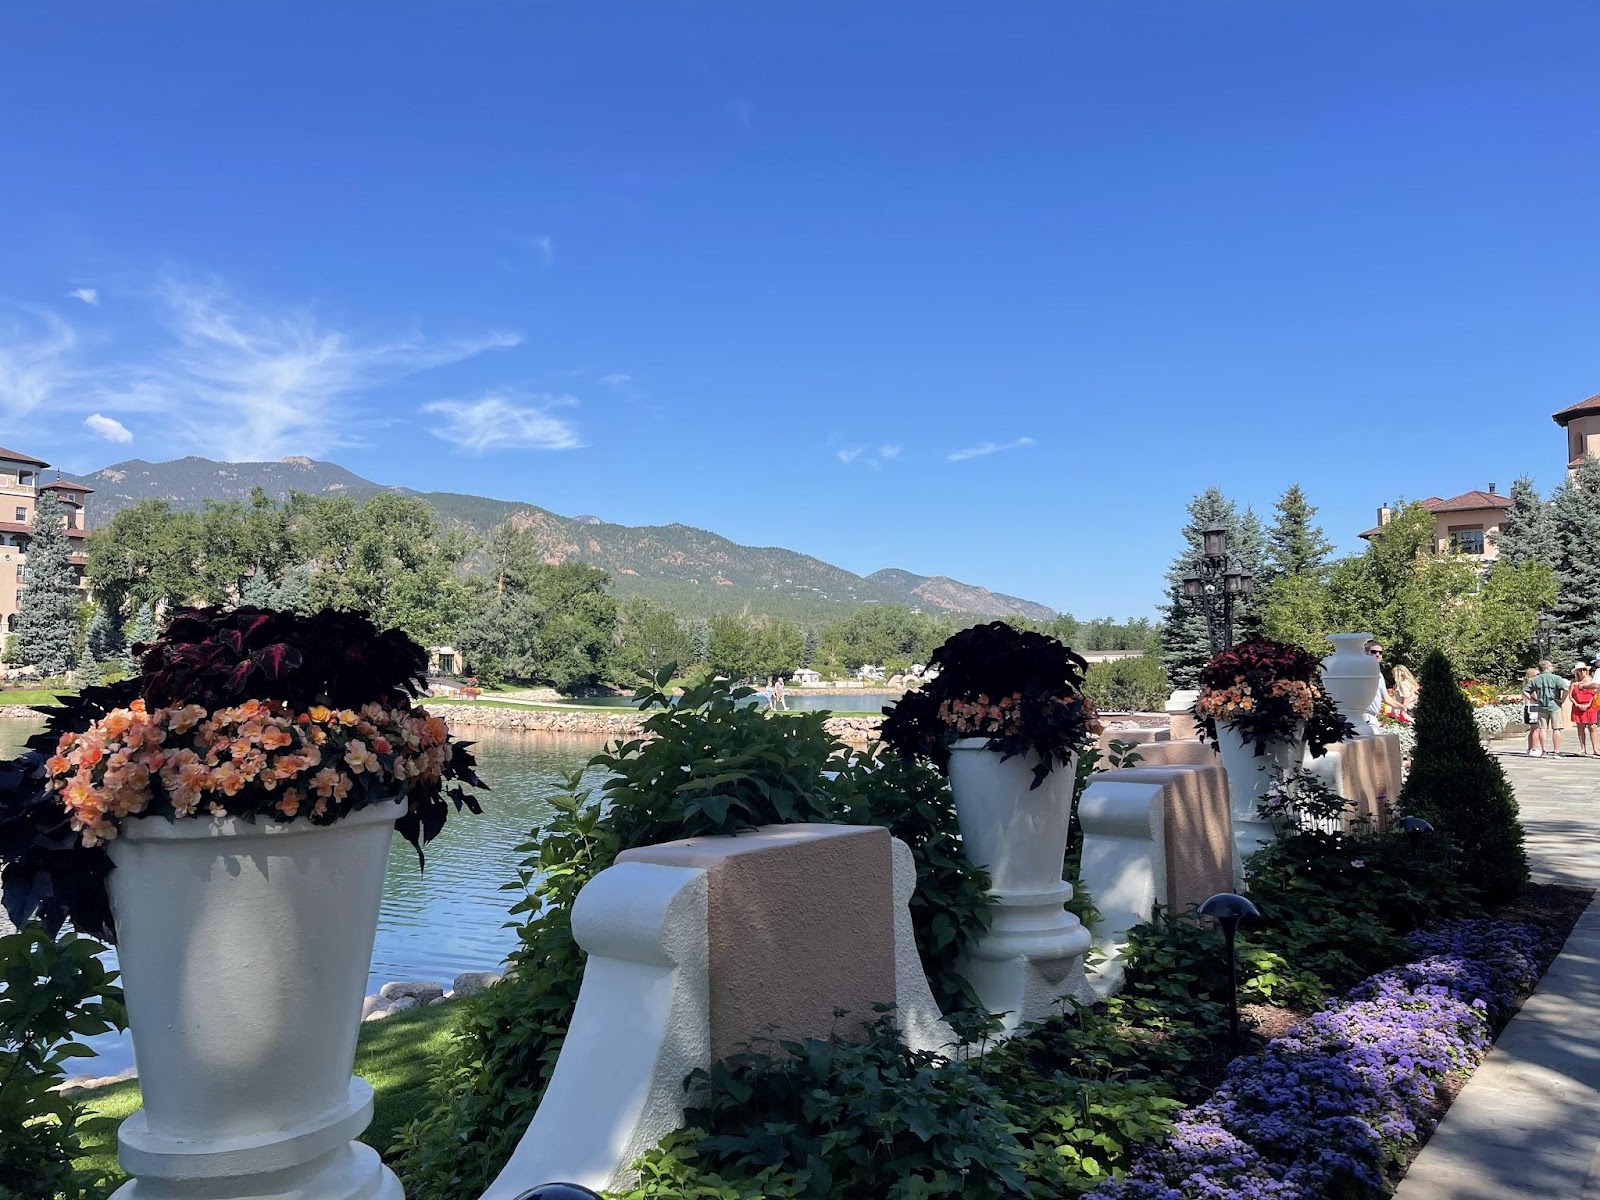 outside the Broadmoor Hotel is a fun thing to do in Colorado Springs for adults